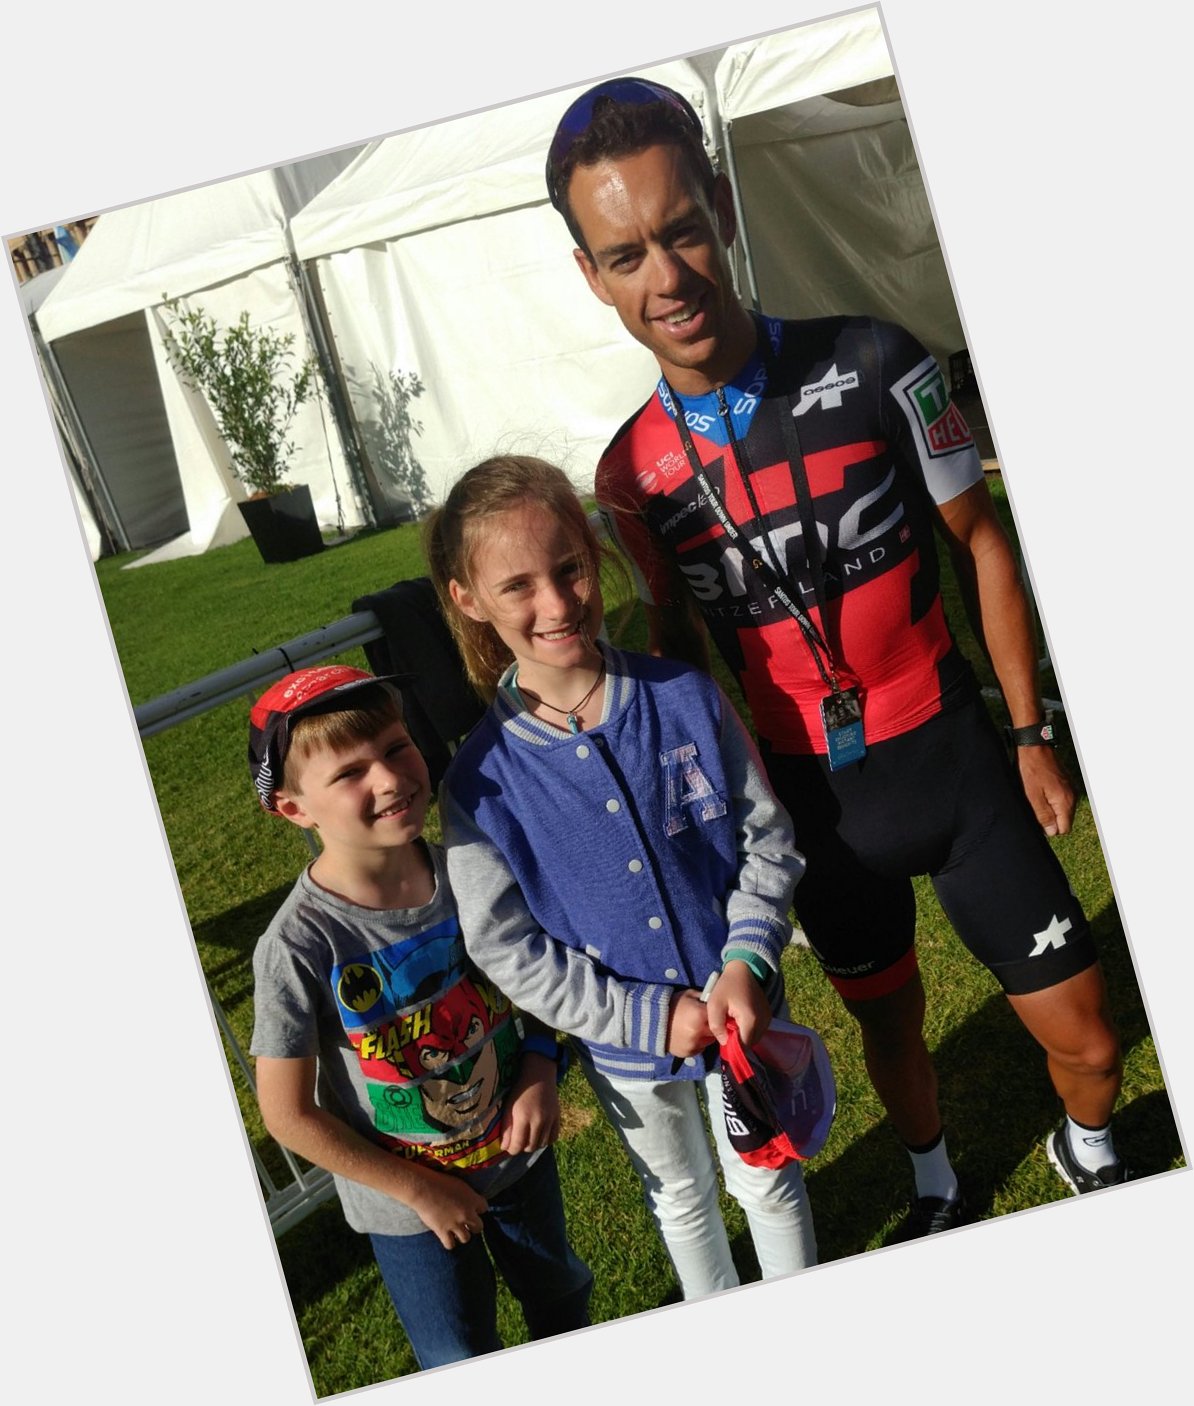   Happy birthday Richie and thanks for making two young fan\s day at the 2018 TDU! 